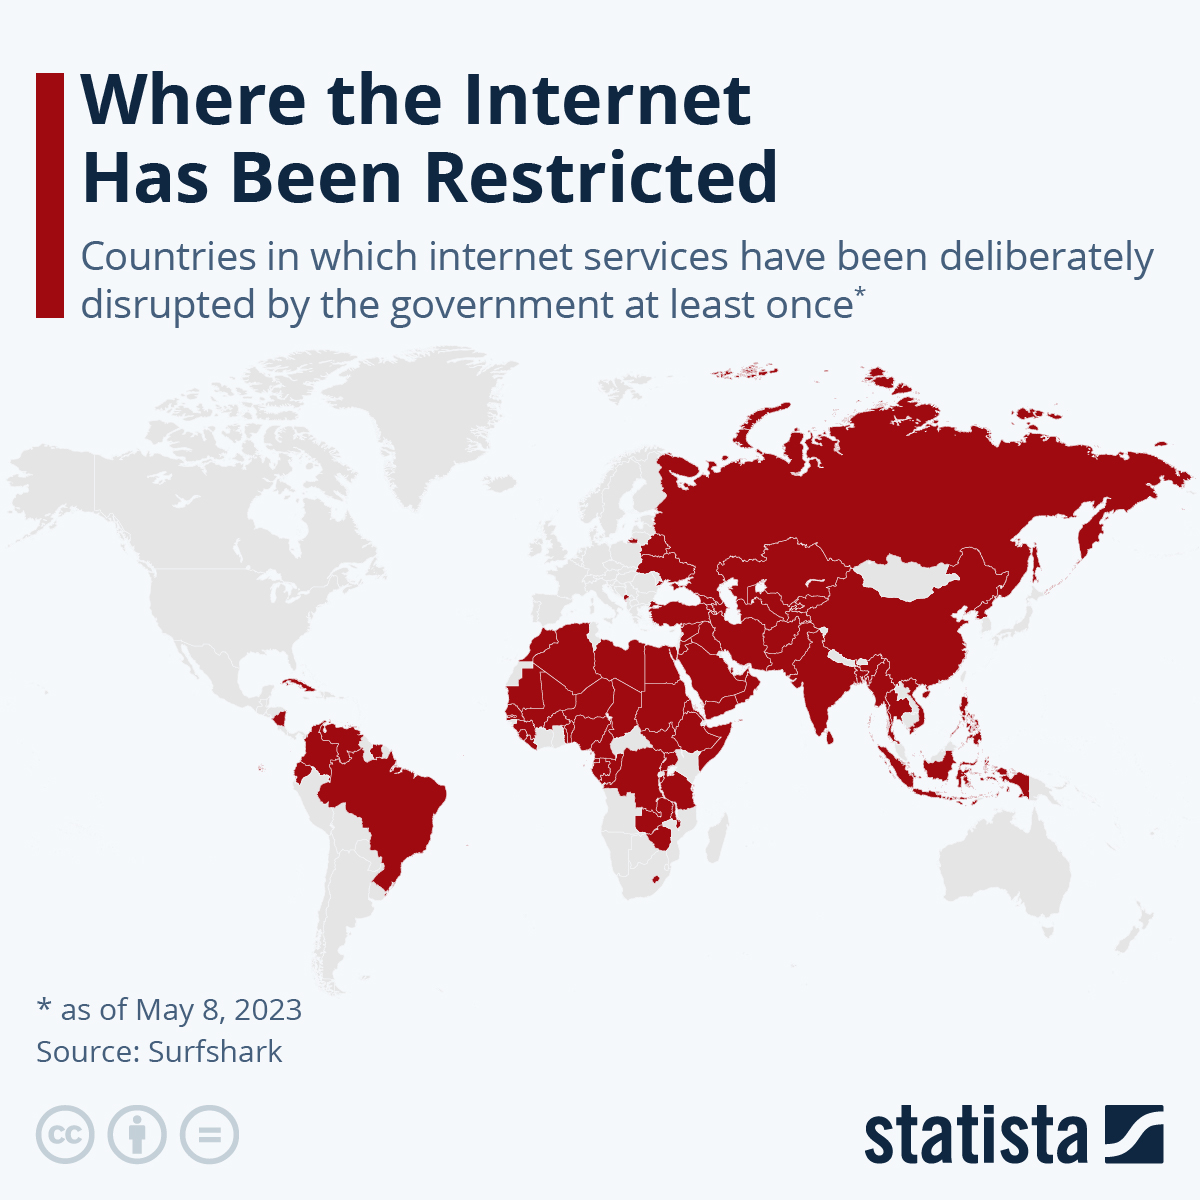 World-map graph showing the countries in which internet services have been deliberately disrupted by the government at least once.